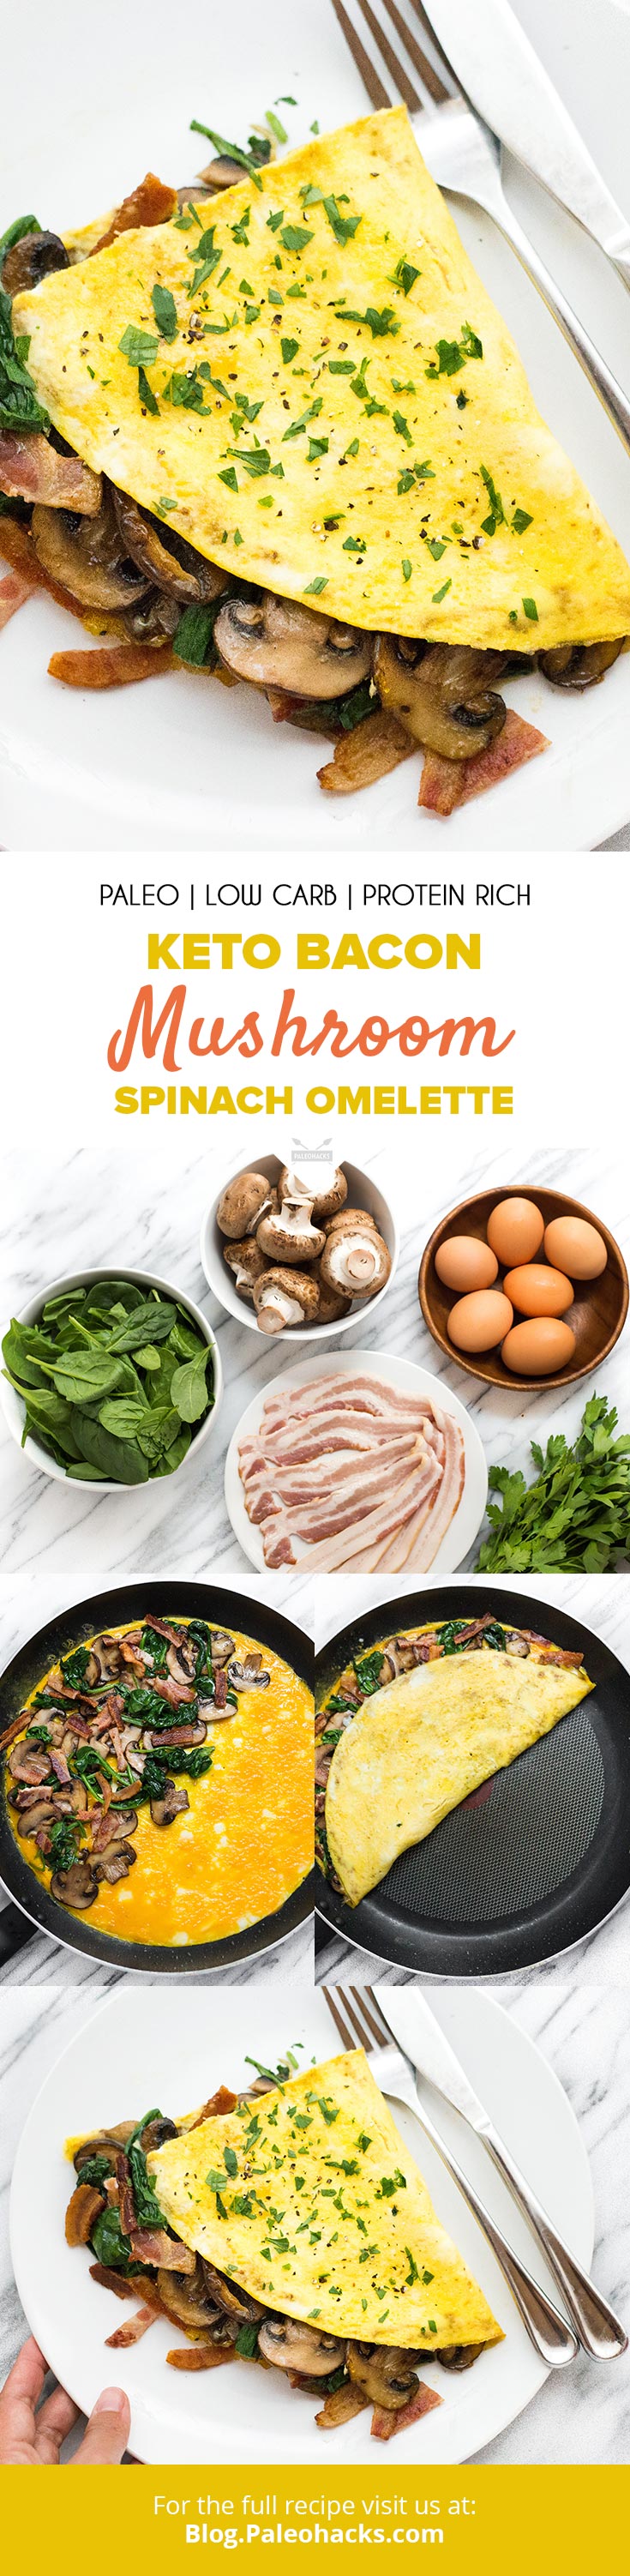 You only need one skillet to make this tasty Keto Bacon and Mushroom Spinach Omelette. Making the perfect omelette is a fine art, we make it easy!